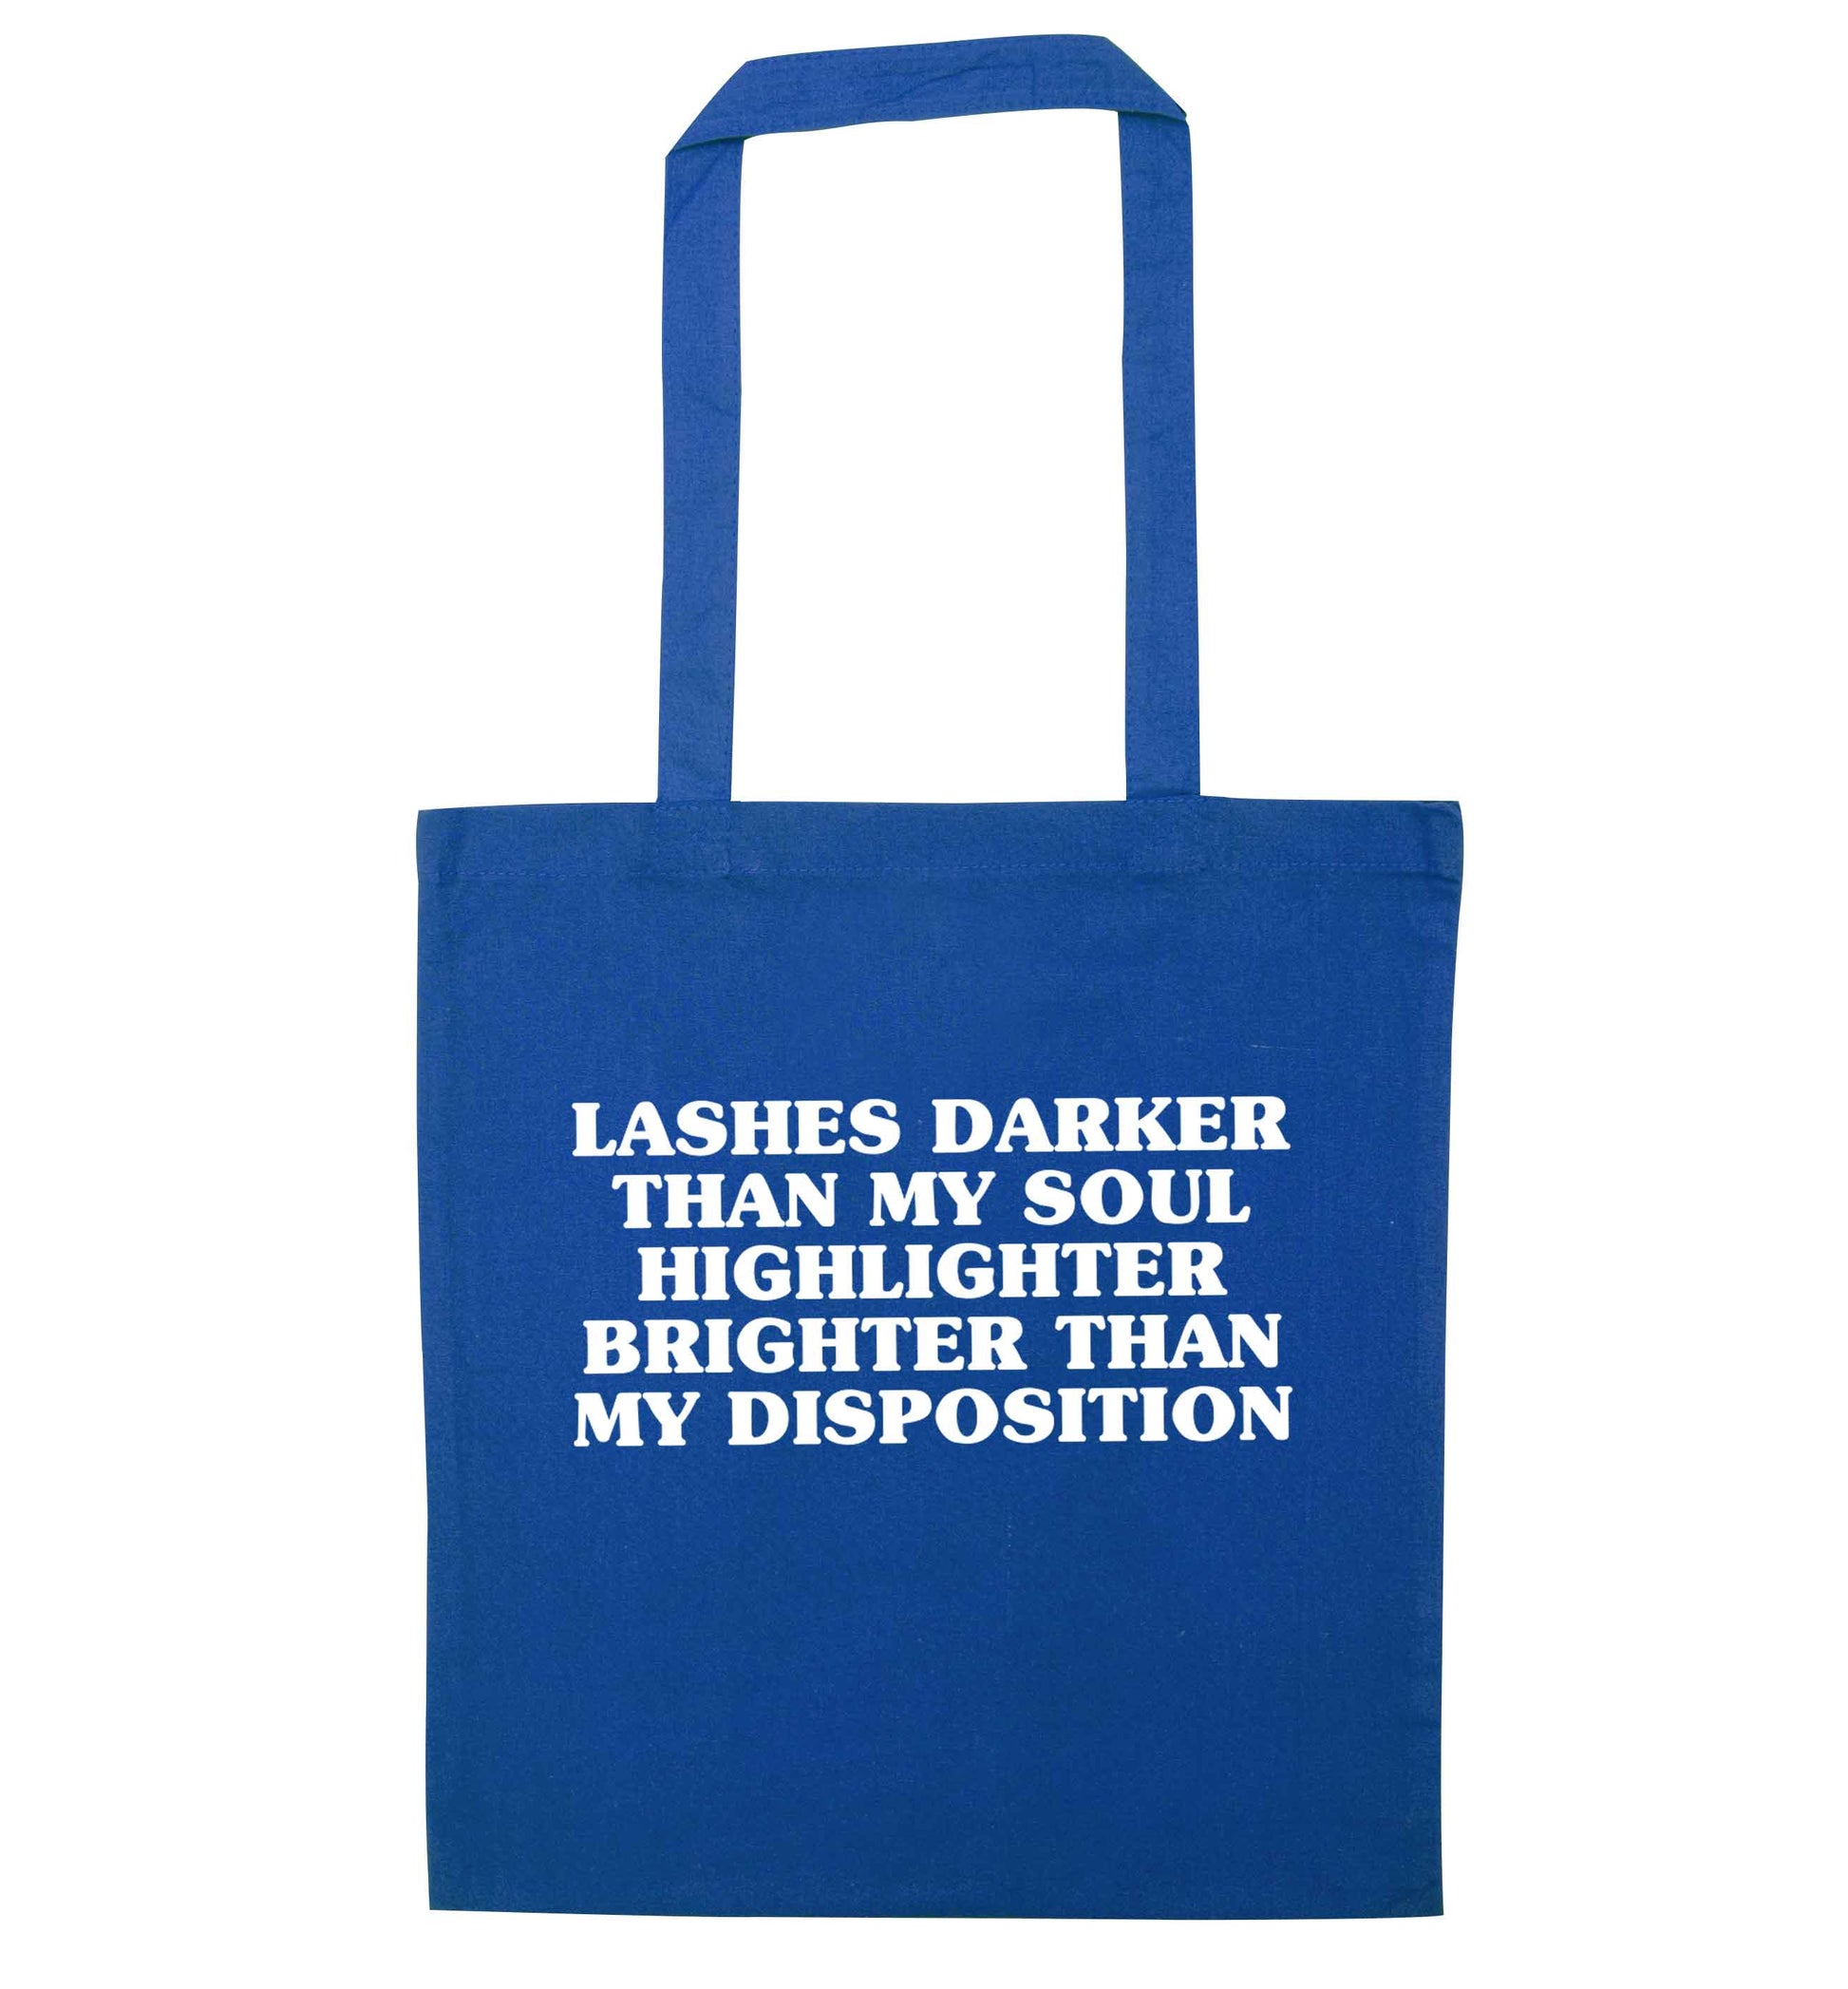 Lashes darker than my soul, highlighter brighter than my disposition blue tote bag